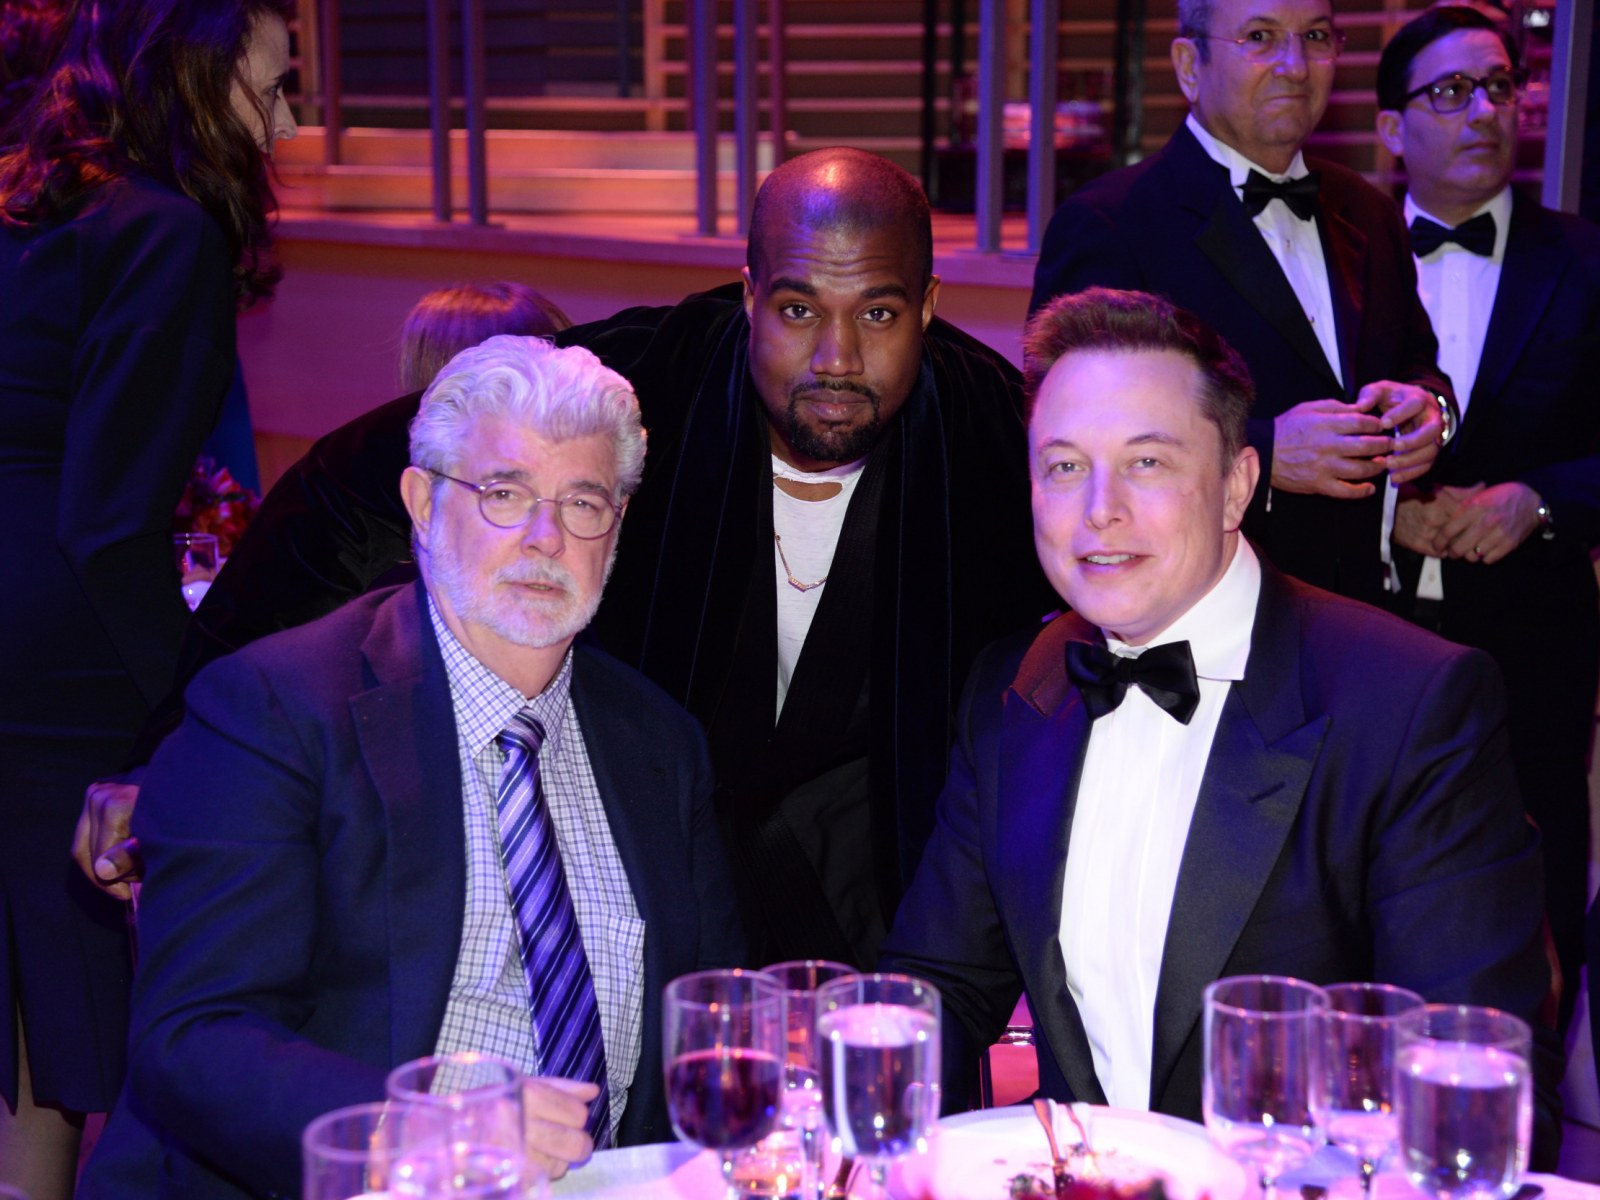 Kanye West and Elon Musk during an event